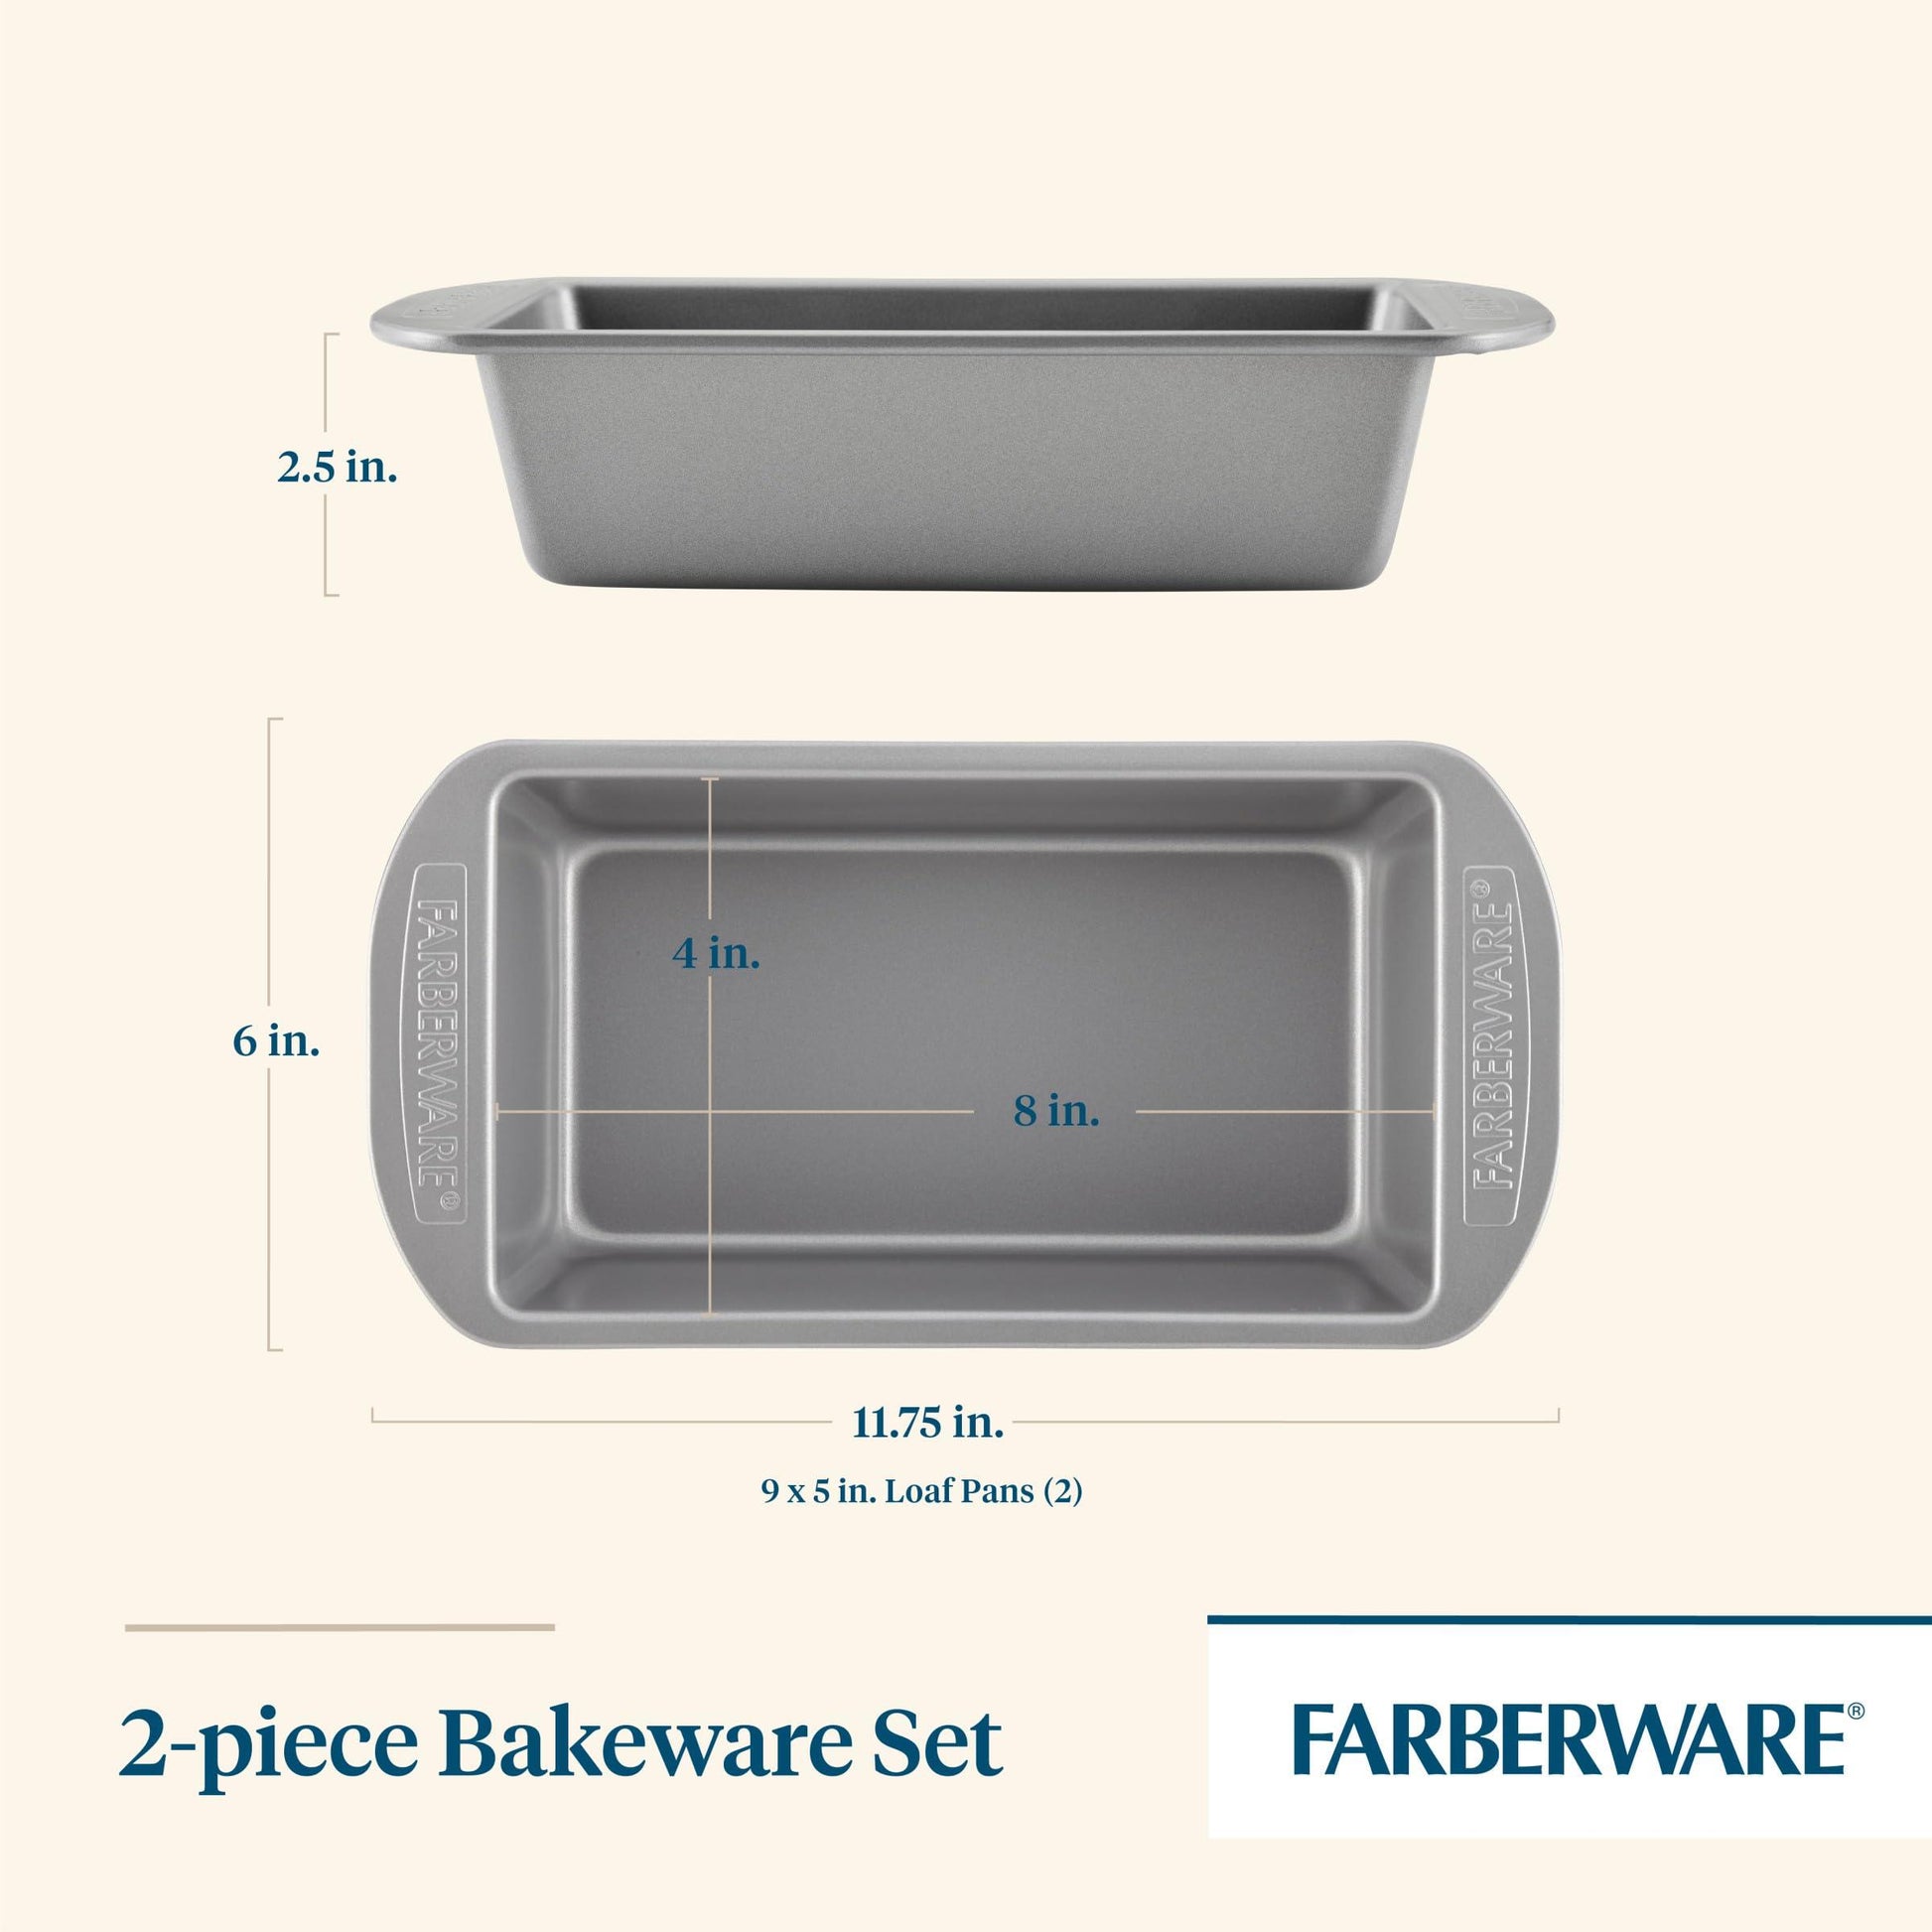 Farberware Bakeware Meatloaf/Nonstick Baking Loaf Pan Set, Two 9-Inch x 5-Inch, Gray - CookCave